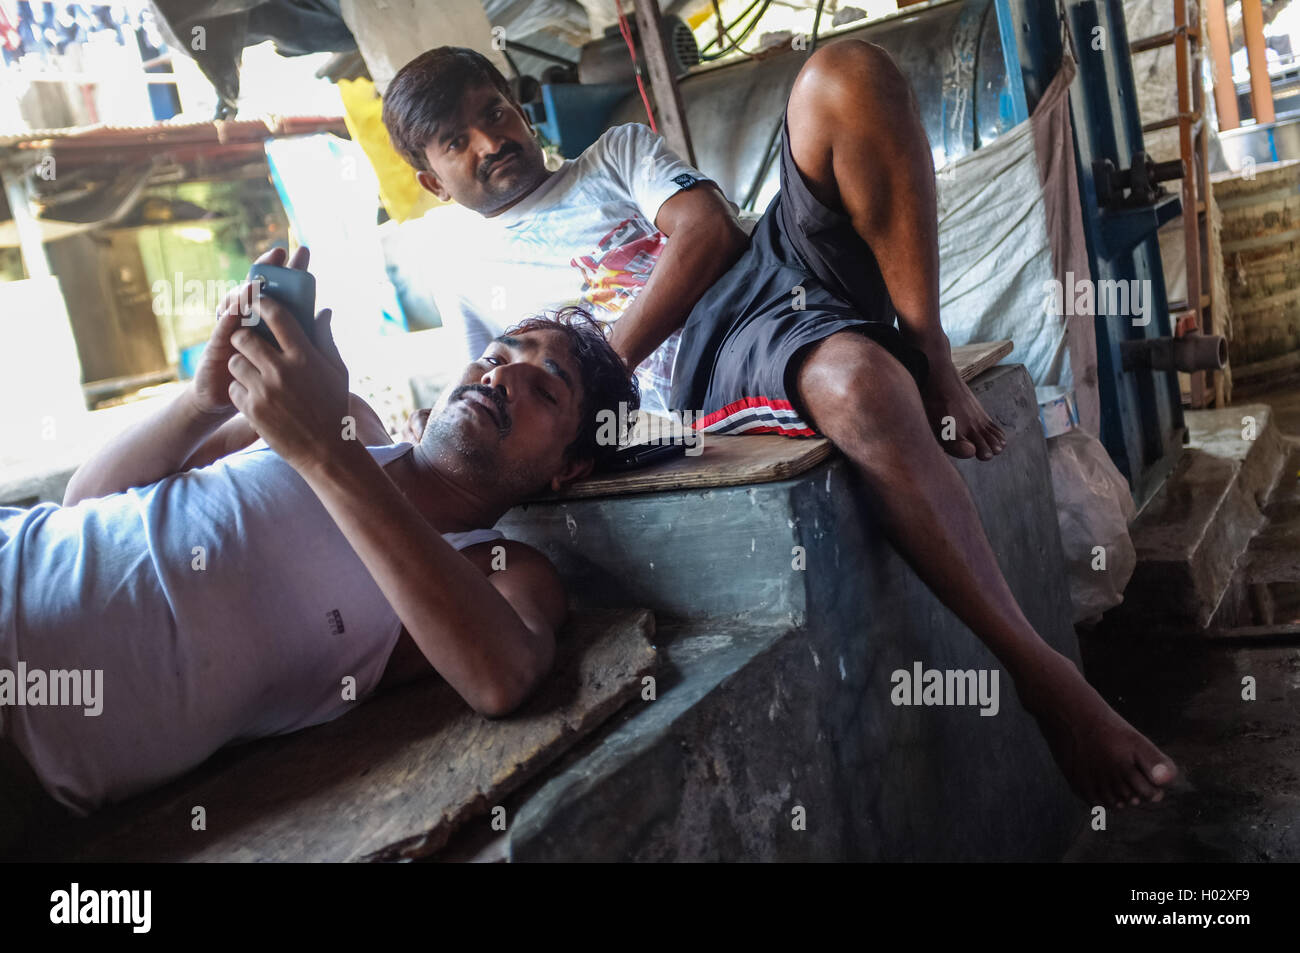 MUMBAI, INDIA - 08 JANUARY 2015: Indian workers taking a rest after an early morning shift in Dhobi ghat. Stock Photo